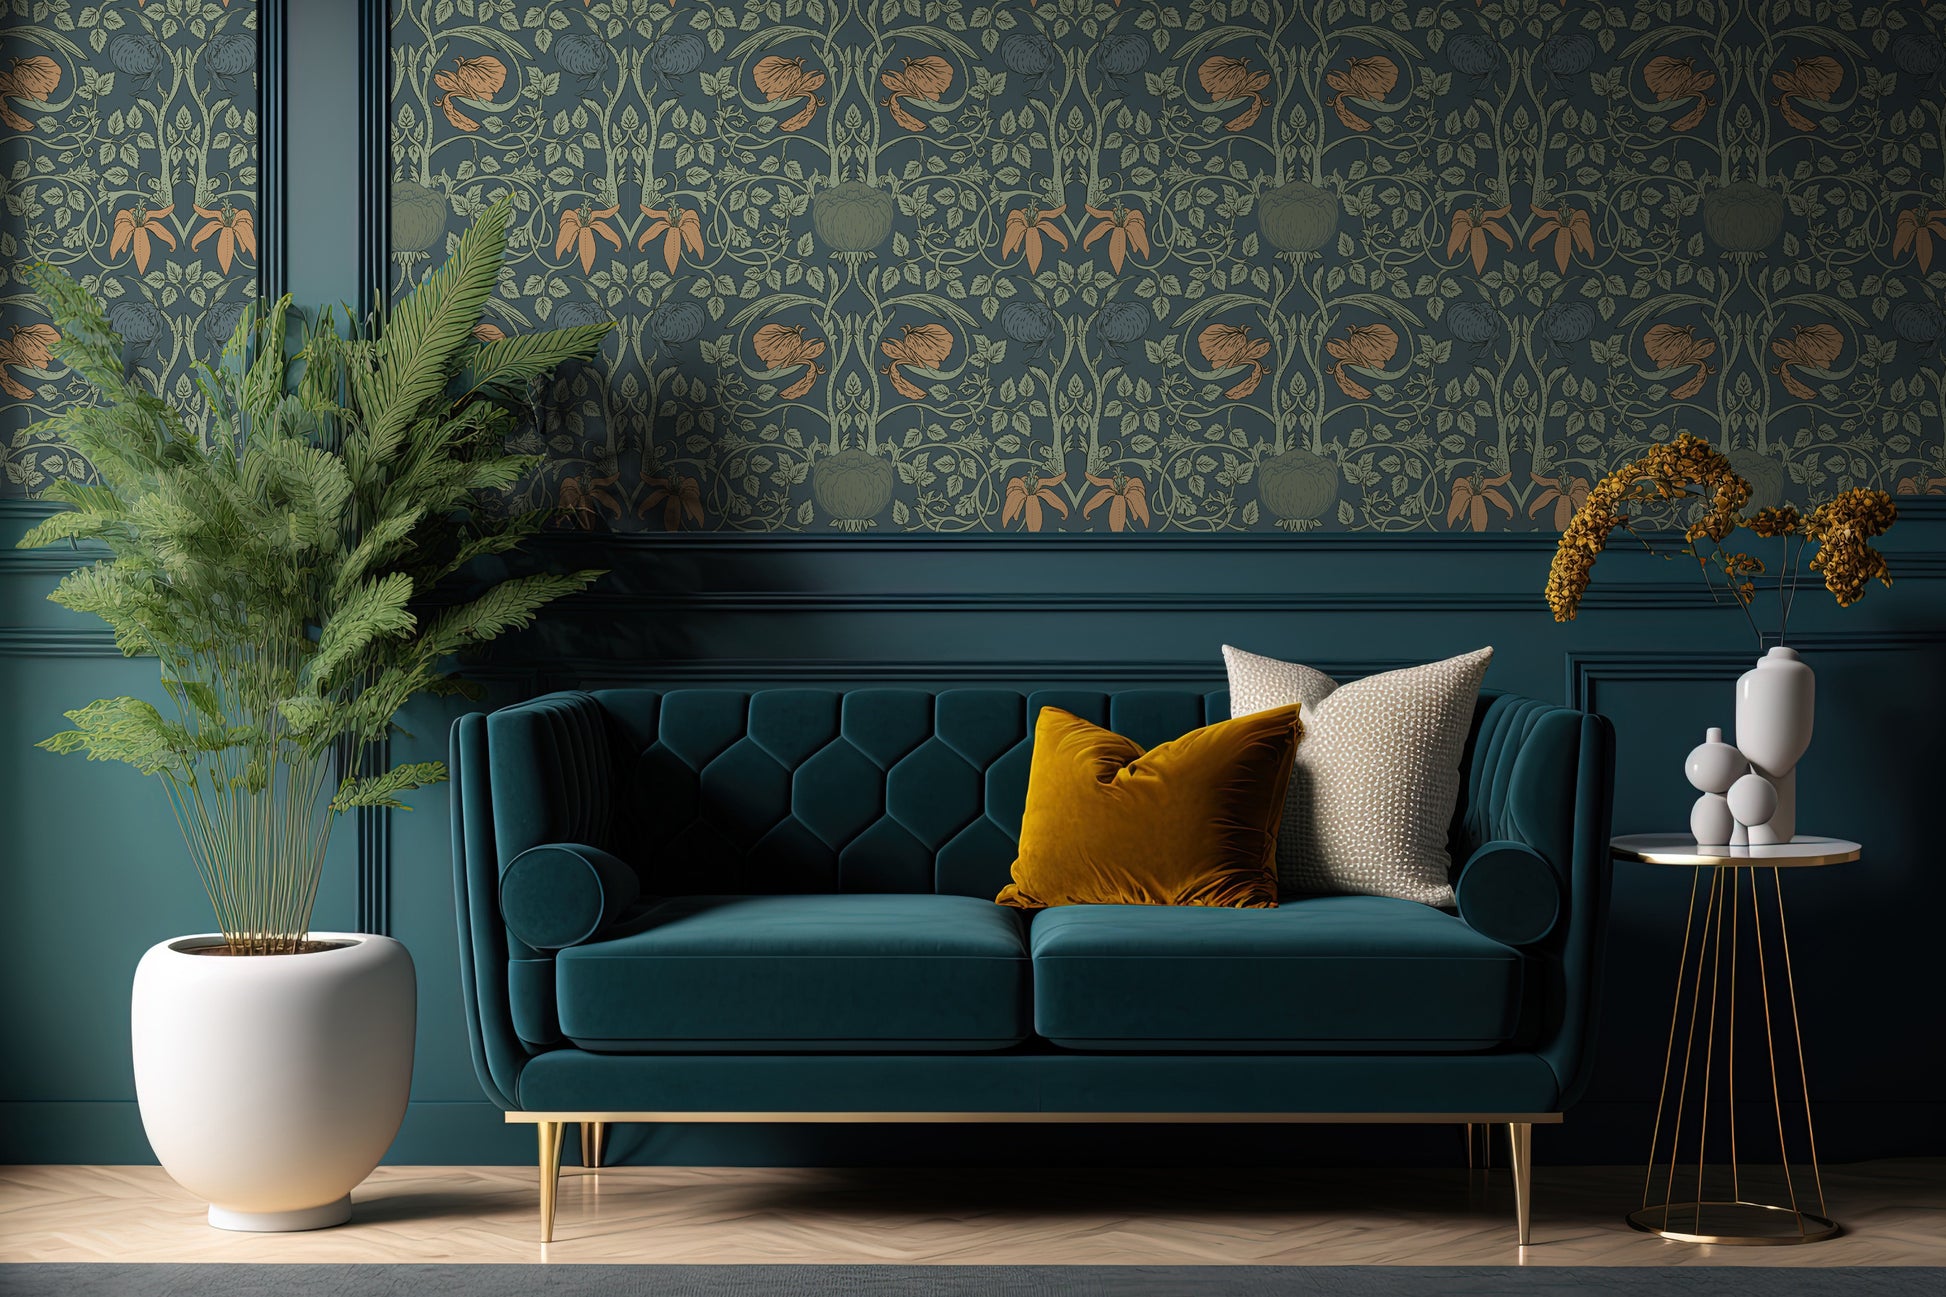 Beautiful living room in jewel tones with soft velvet sofa. On the wall is our easy removable dark floral peel and stick wallpaper. 